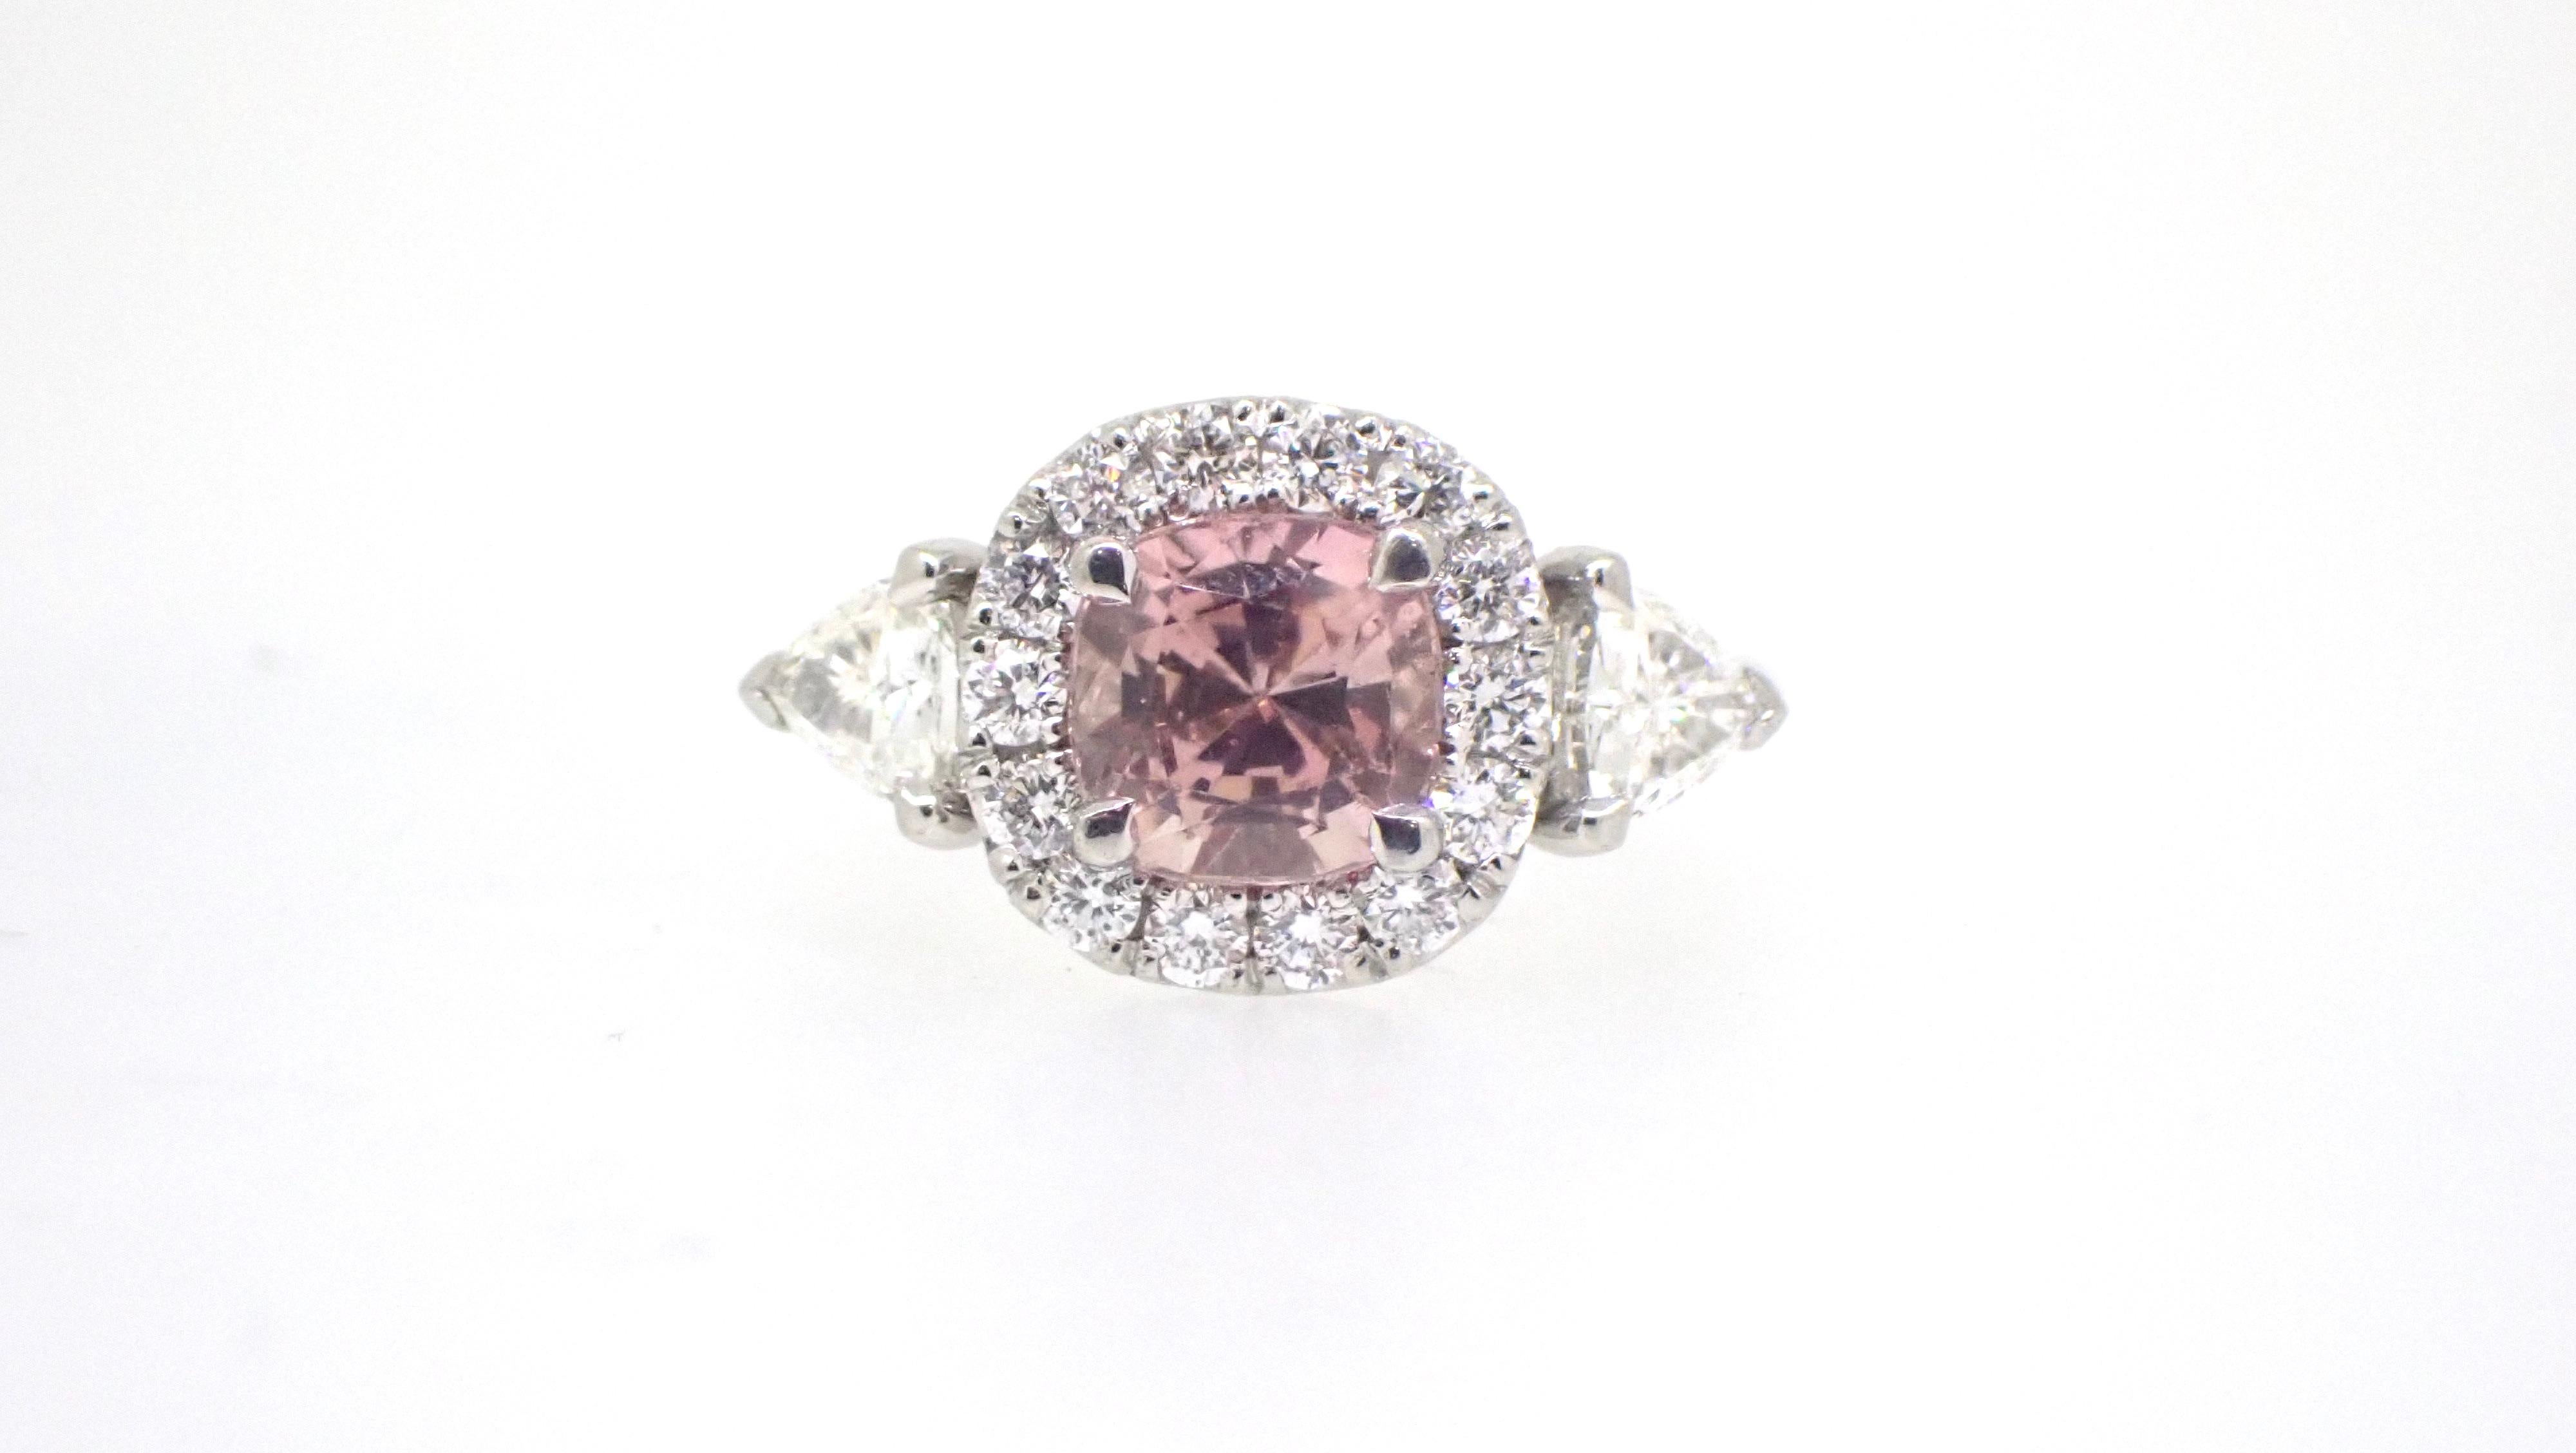 The romanticism of this 1.95 Carat Pink Tourmaline Diamond Platinum Engagement Ring is breathtaking. The colour of the pink tourmaline could be confused with a pink diamond, but it is definitely a blush coloured, cushion cut tourmaline!

Set in